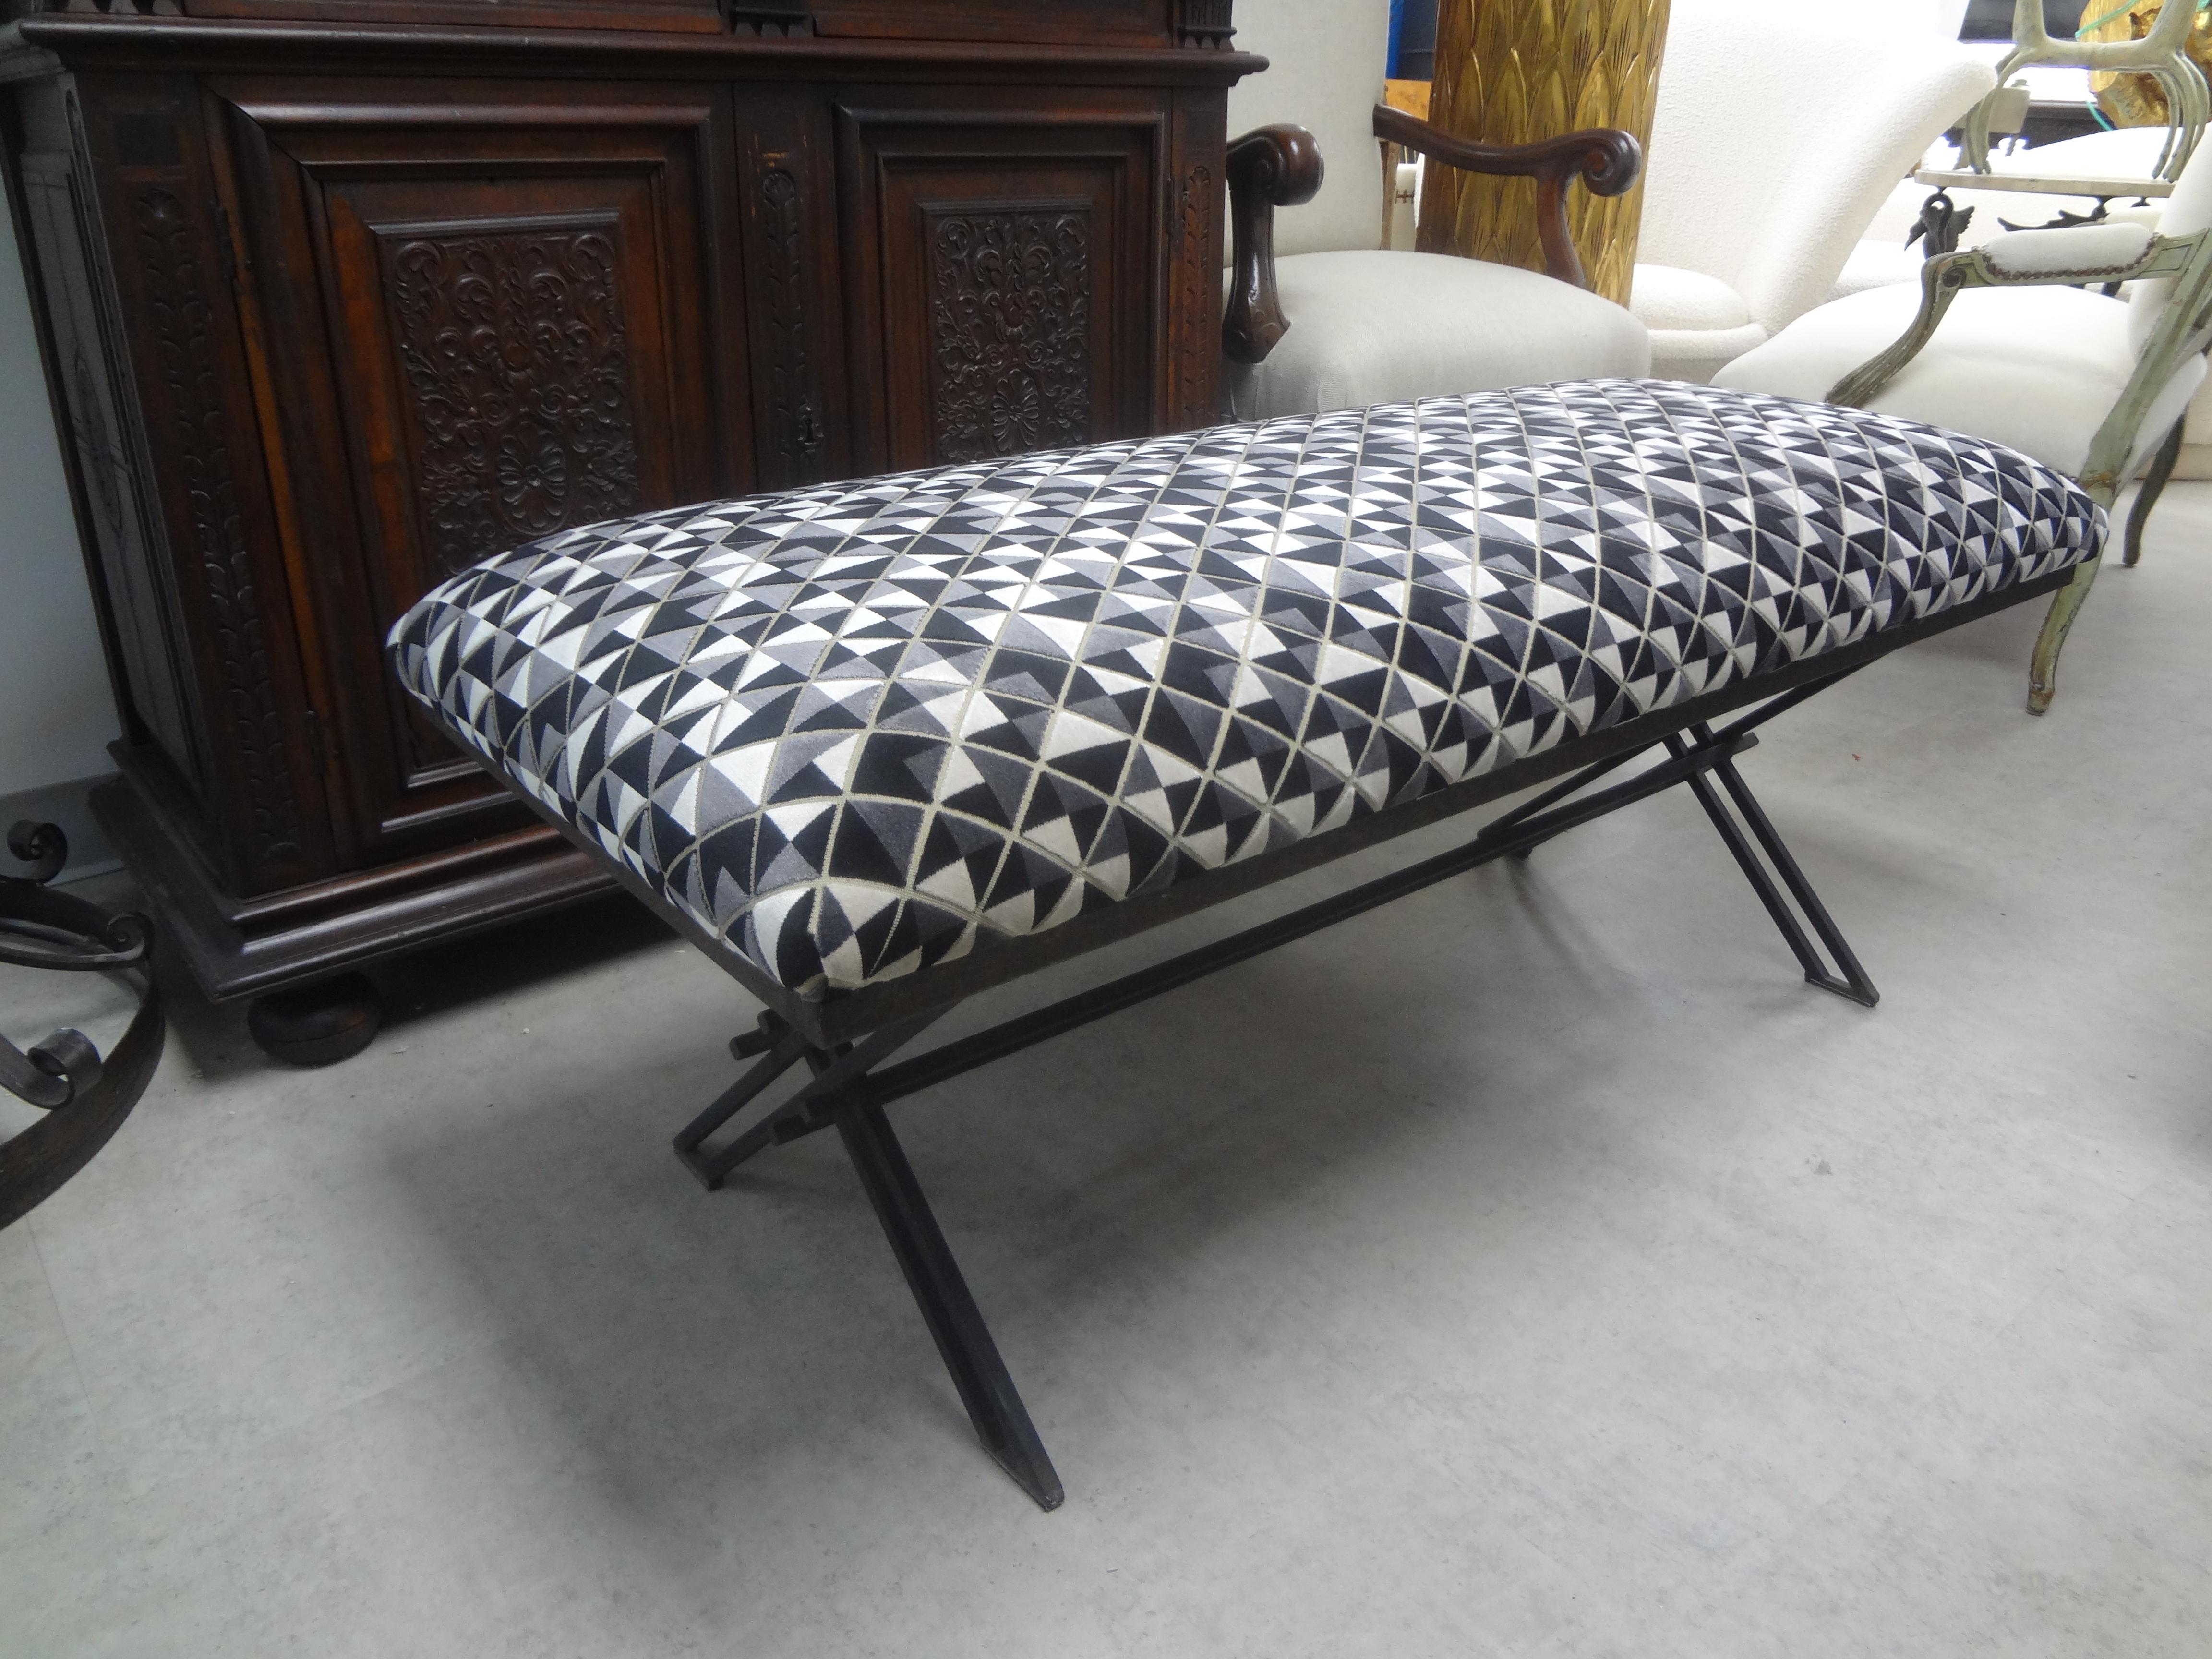 Vintage geometric wrought iron bench. This stunning heavy weight midcentury iron modernist bench has been professionally upholstered in a stunning plush geometric cut velvet fabric. This versatile bench is perfect for a hall, living area, or bedroom.